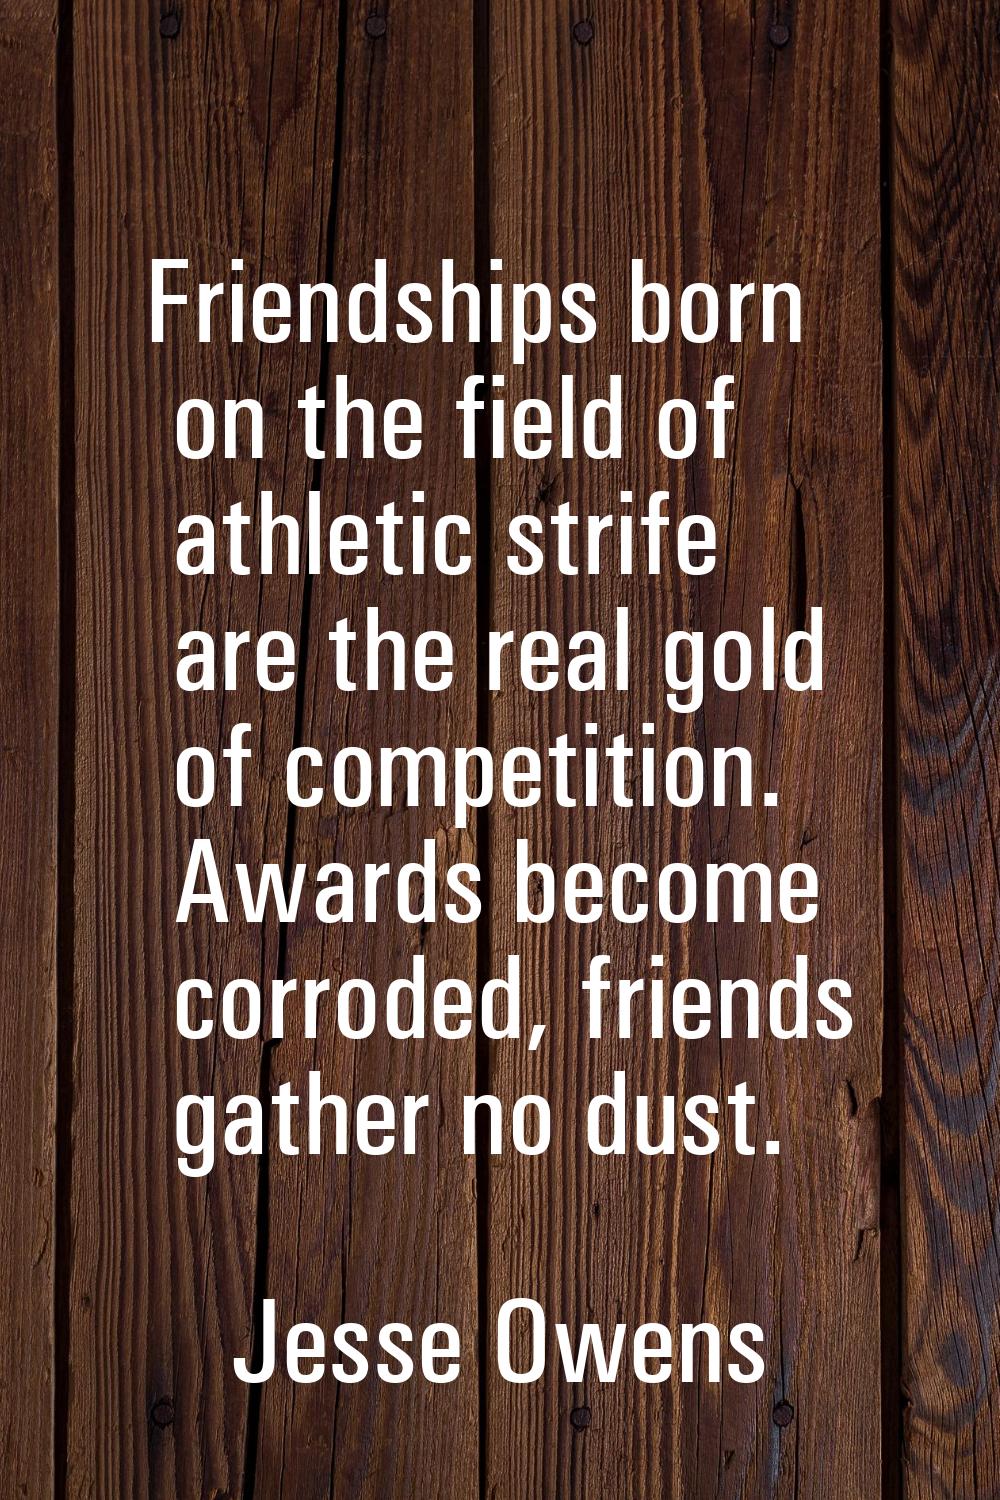 Friendships born on the field of athletic strife are the real gold of competition. Awards become co